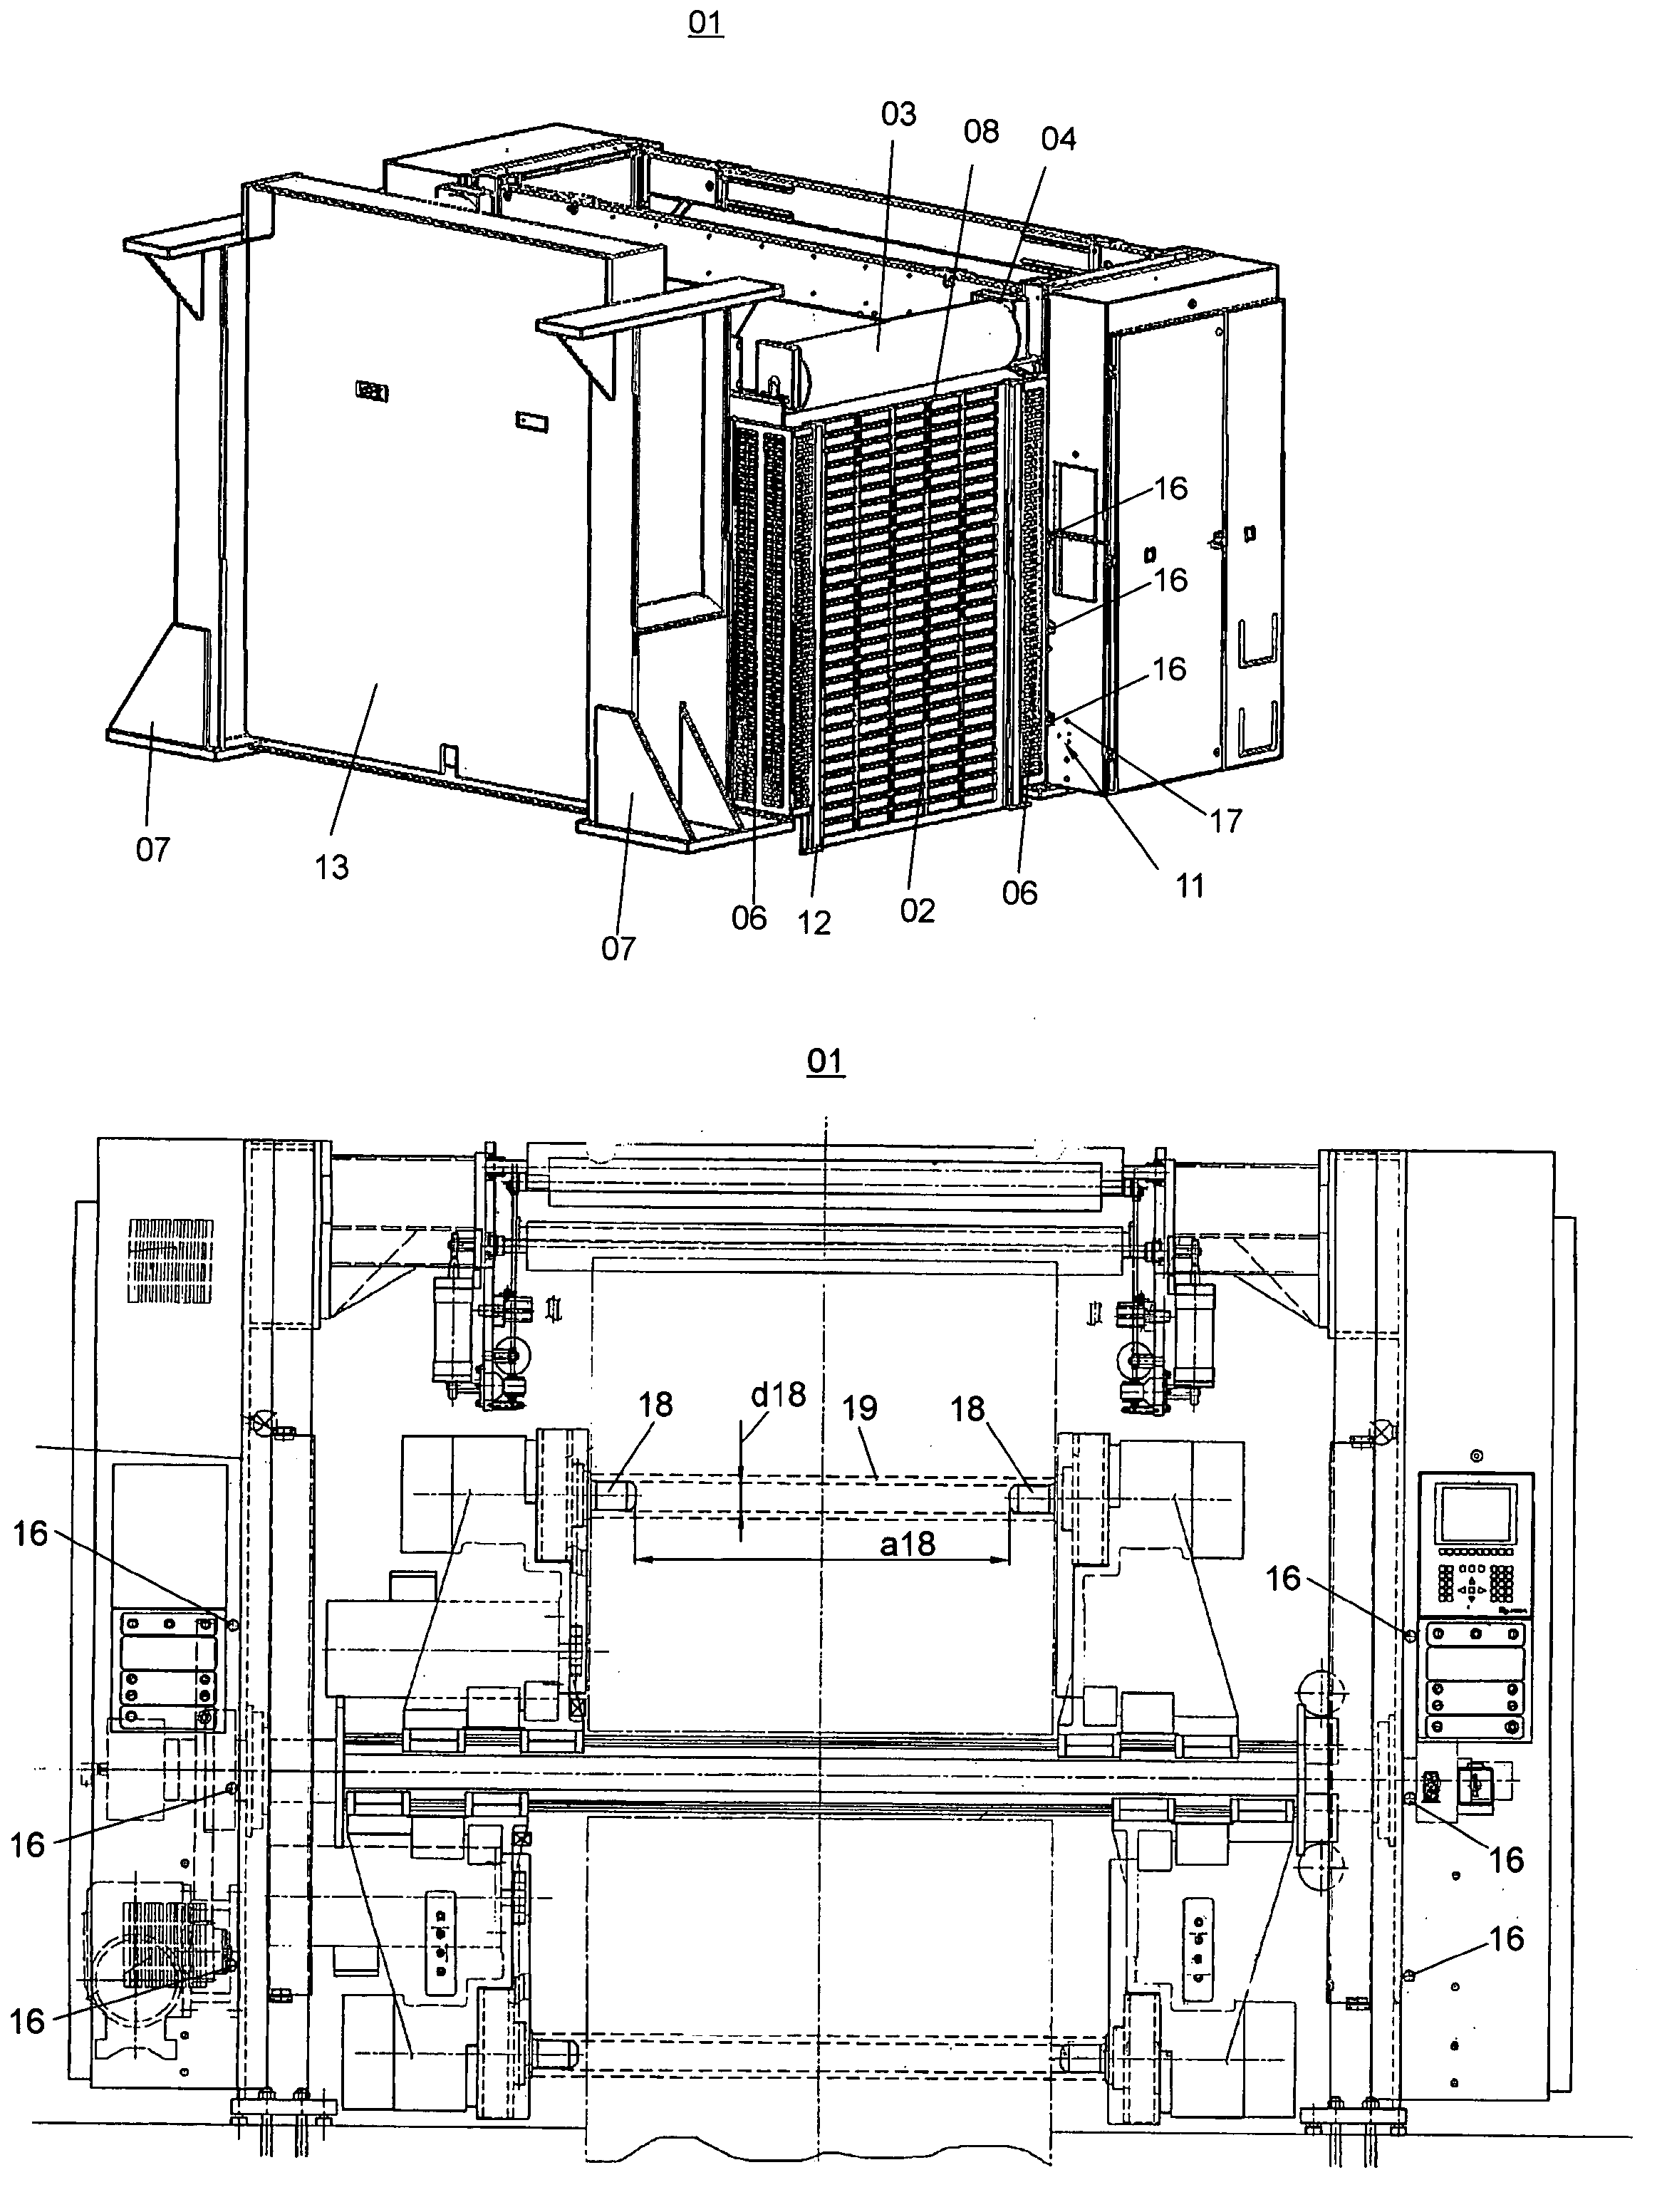 Device for covering a danger area on a roll changer and a method for controlling a device